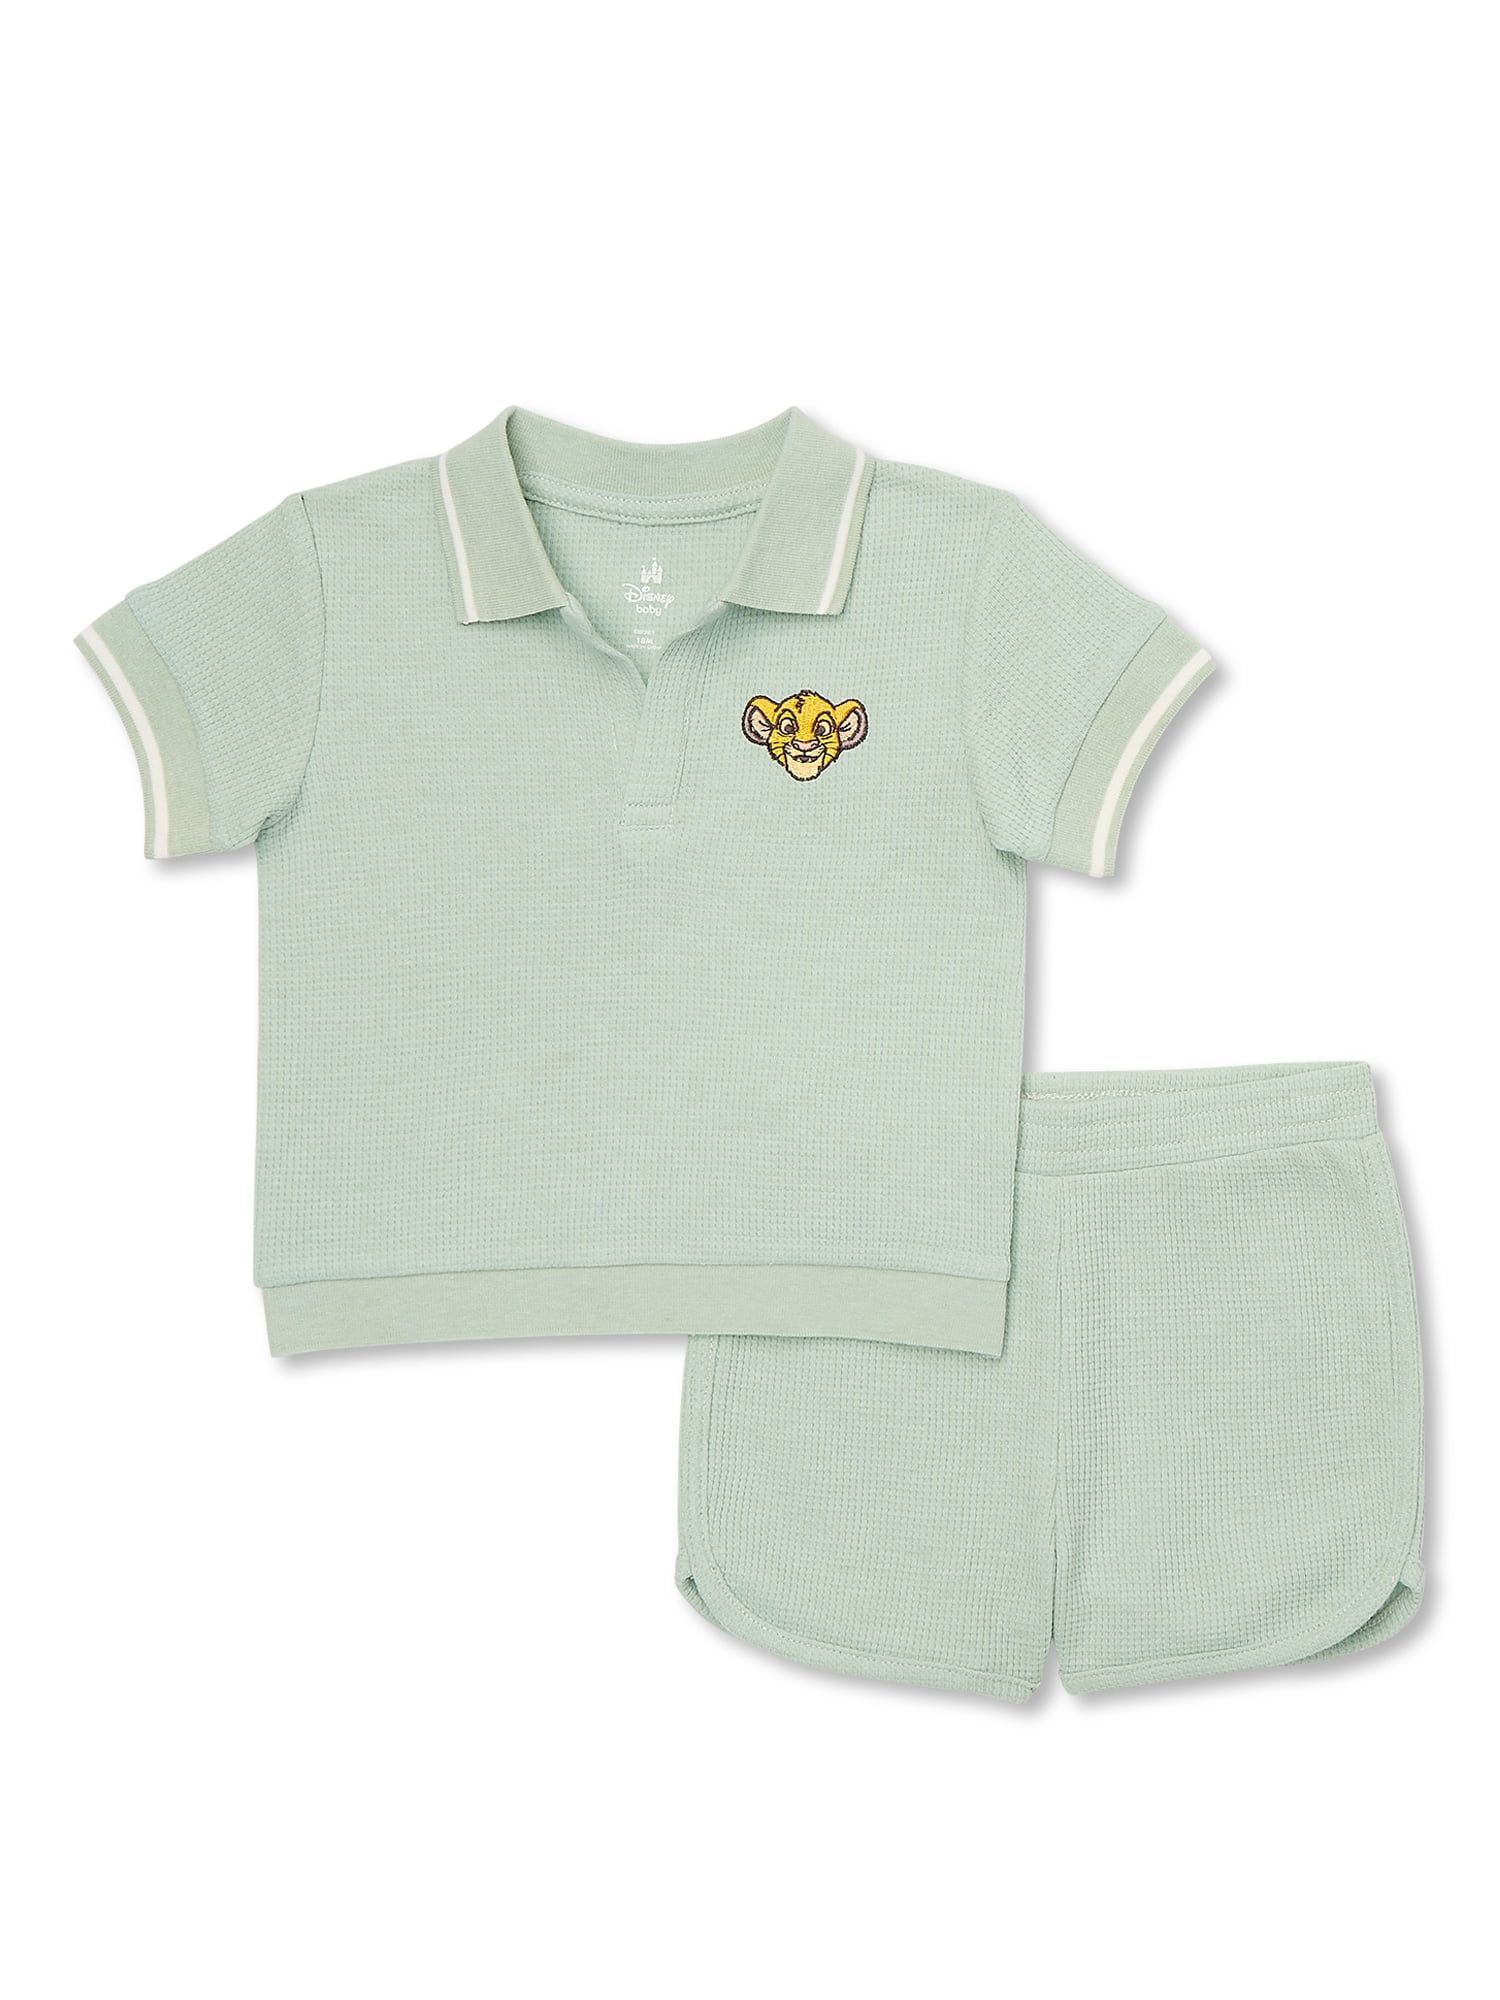 The Lion King Baby Polo Shirt and Shorts Set, 2-Piece, Sizes 0M-18M | Walmart (US)